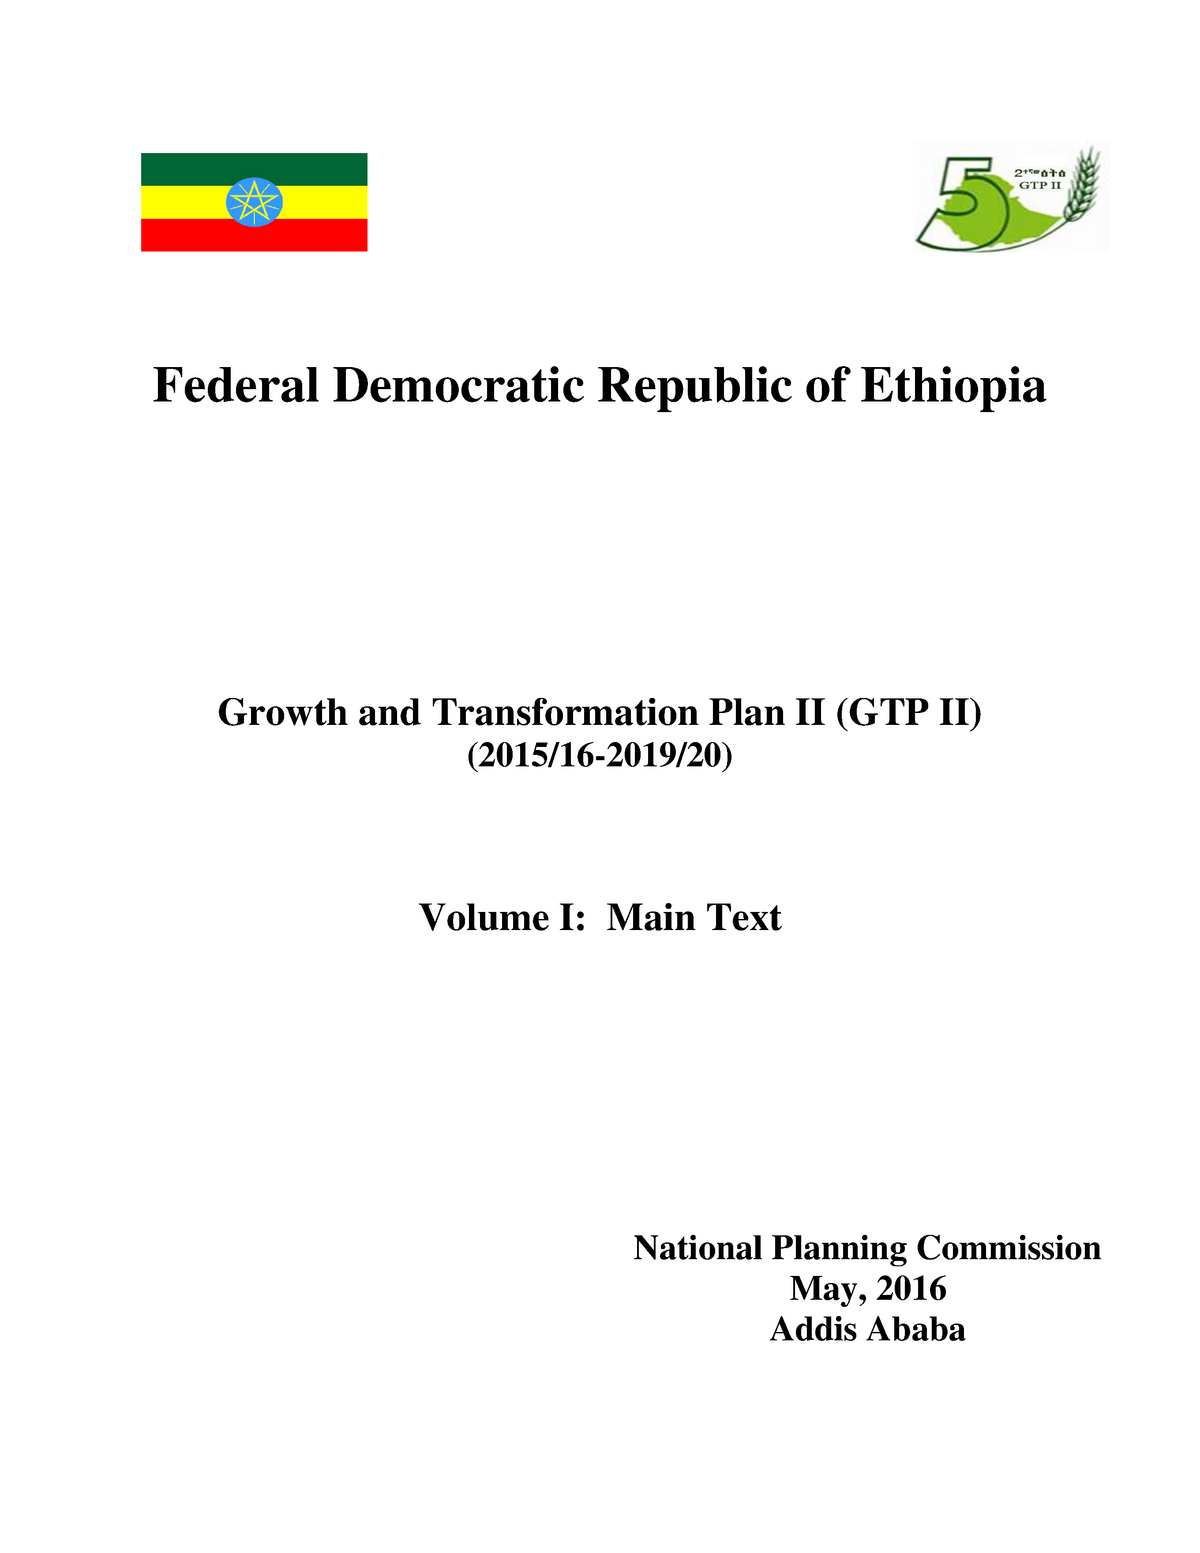 small business plan pdf in ethiopia